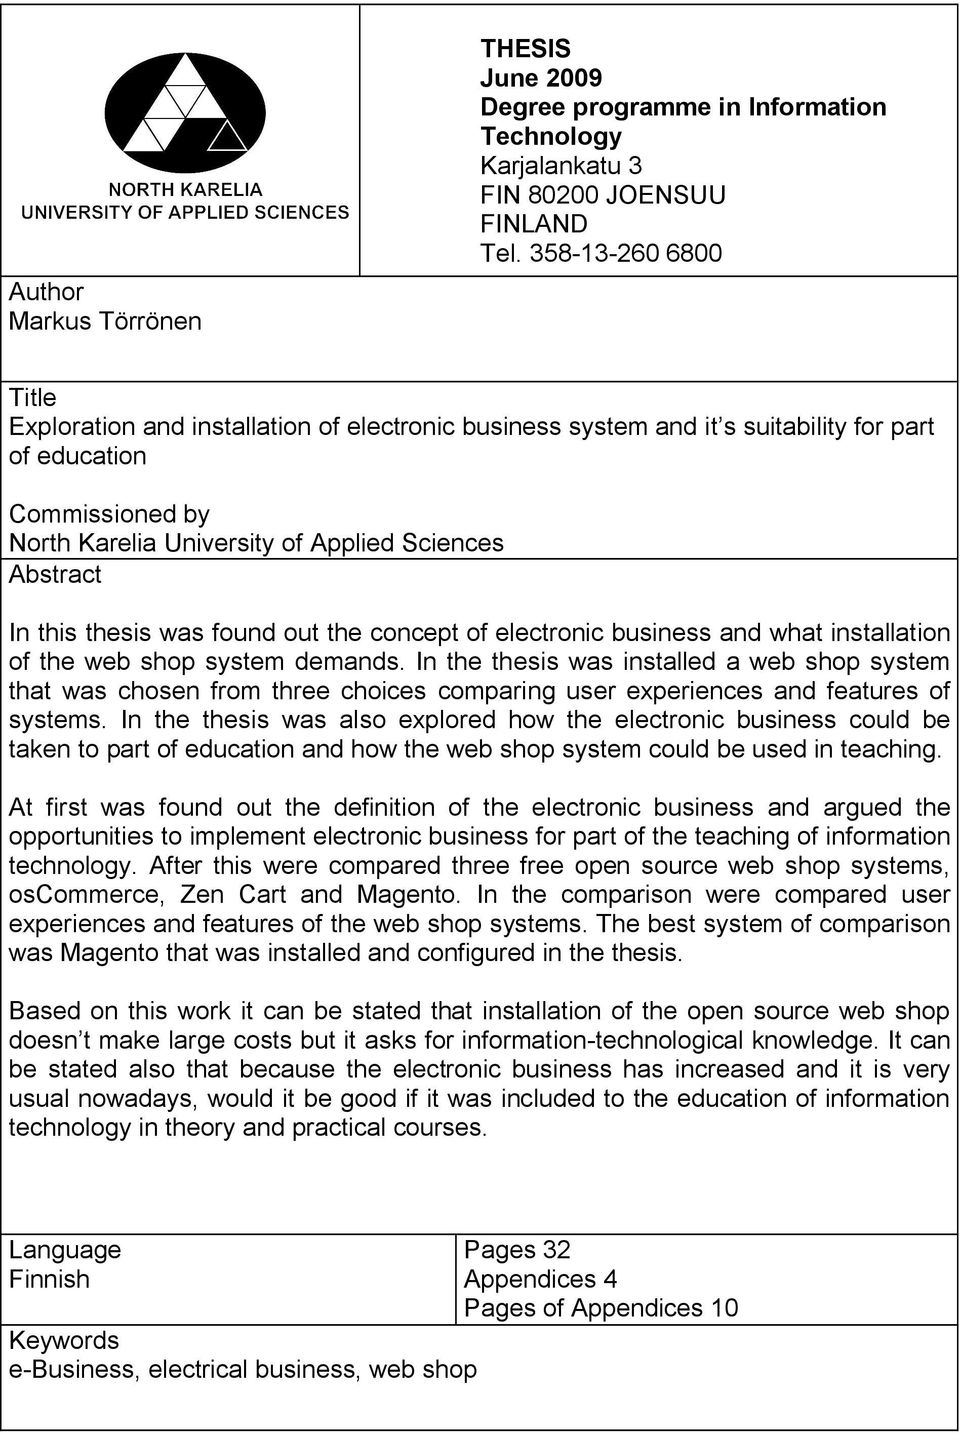 this thesis was found out the concept of electronic business and what installation of the web shop system demands.